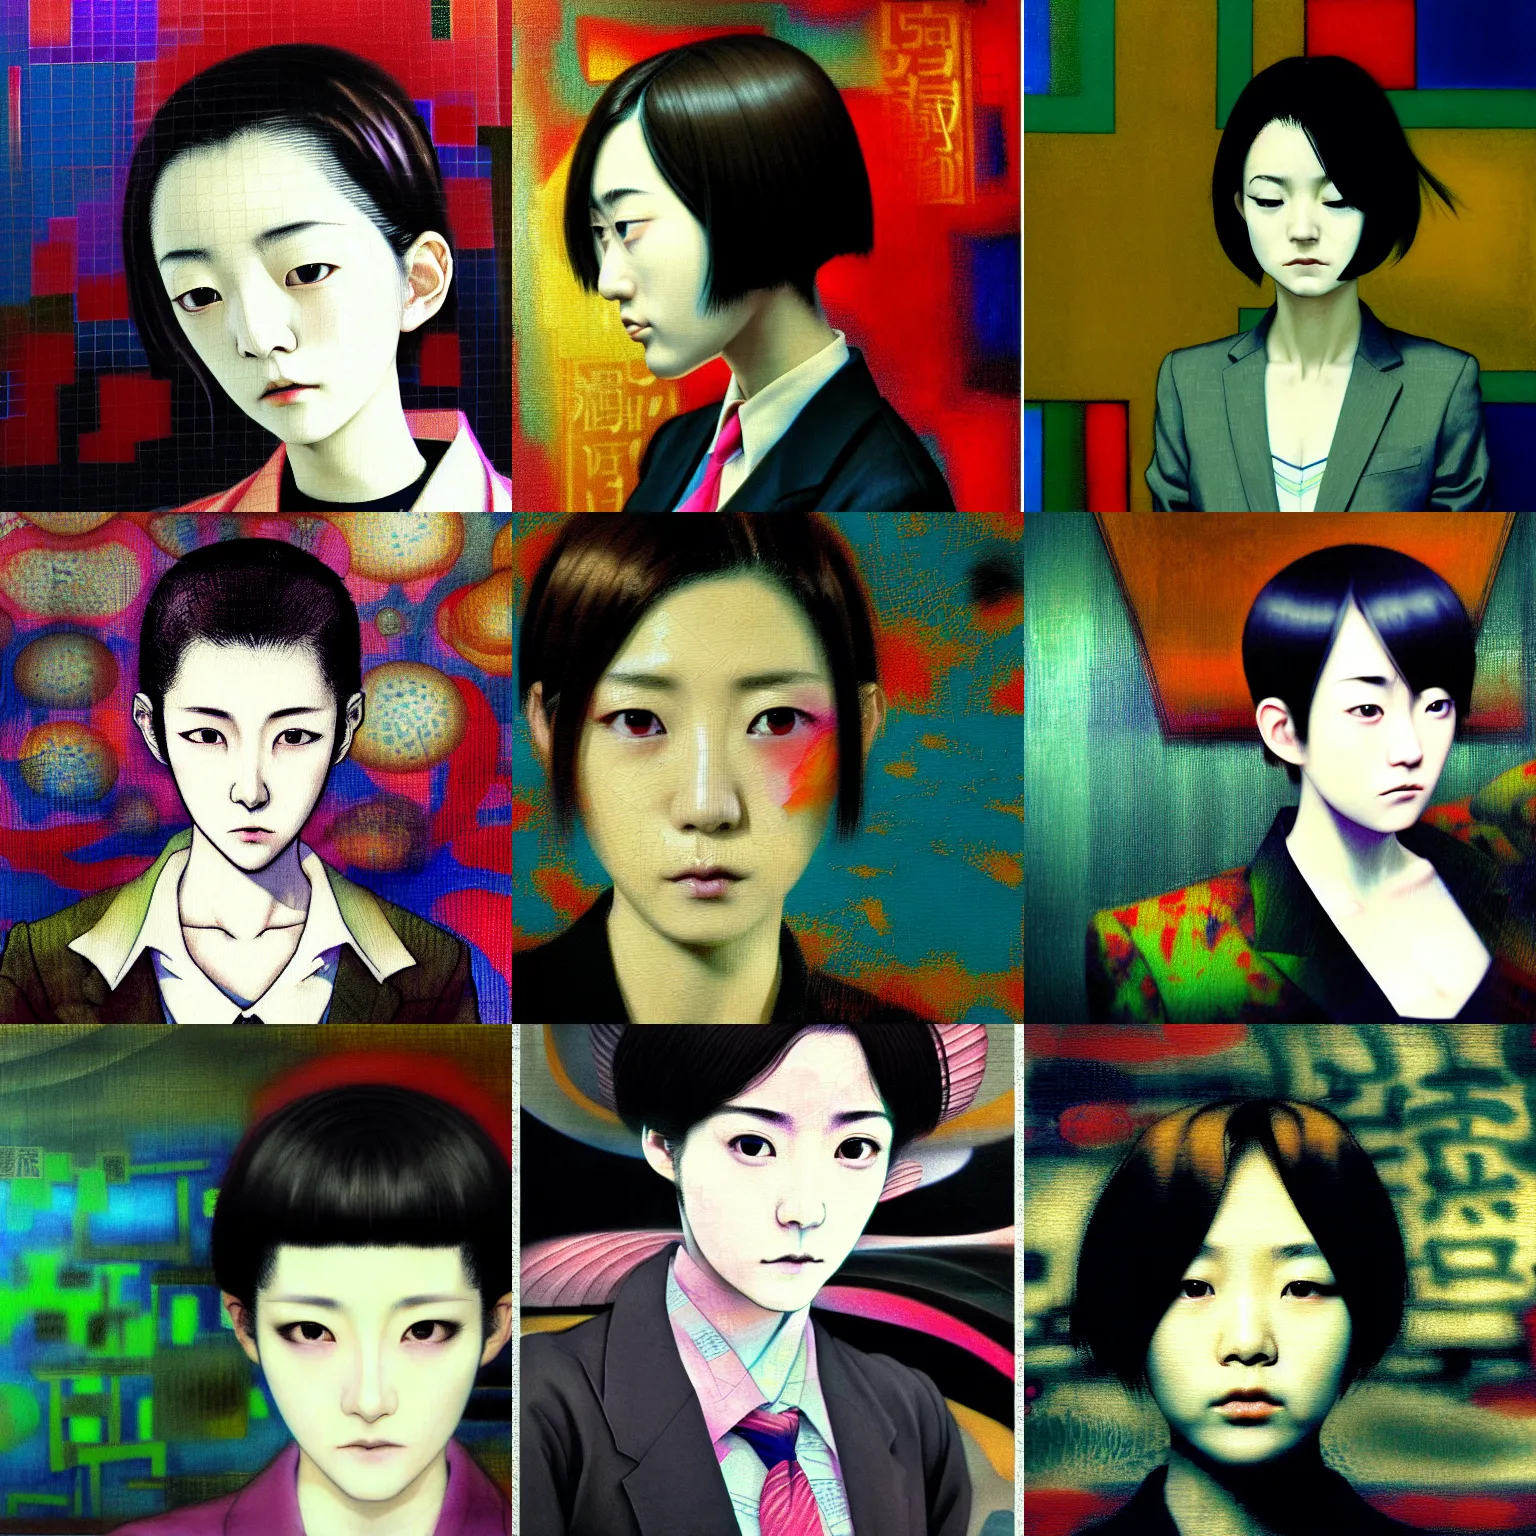 Prompt: yoshitaka amano blurred and dreamy realistic three quarter angle portrait of a young woman with short hair and black eyes wearing office suit with tie, junji ito abstract patterns in the background, satoshi kon anime, wong kar - wai color palette, noisy film grain effect, highly detailed, renaissance oil painting, weird portrait angle, blurred lost edges